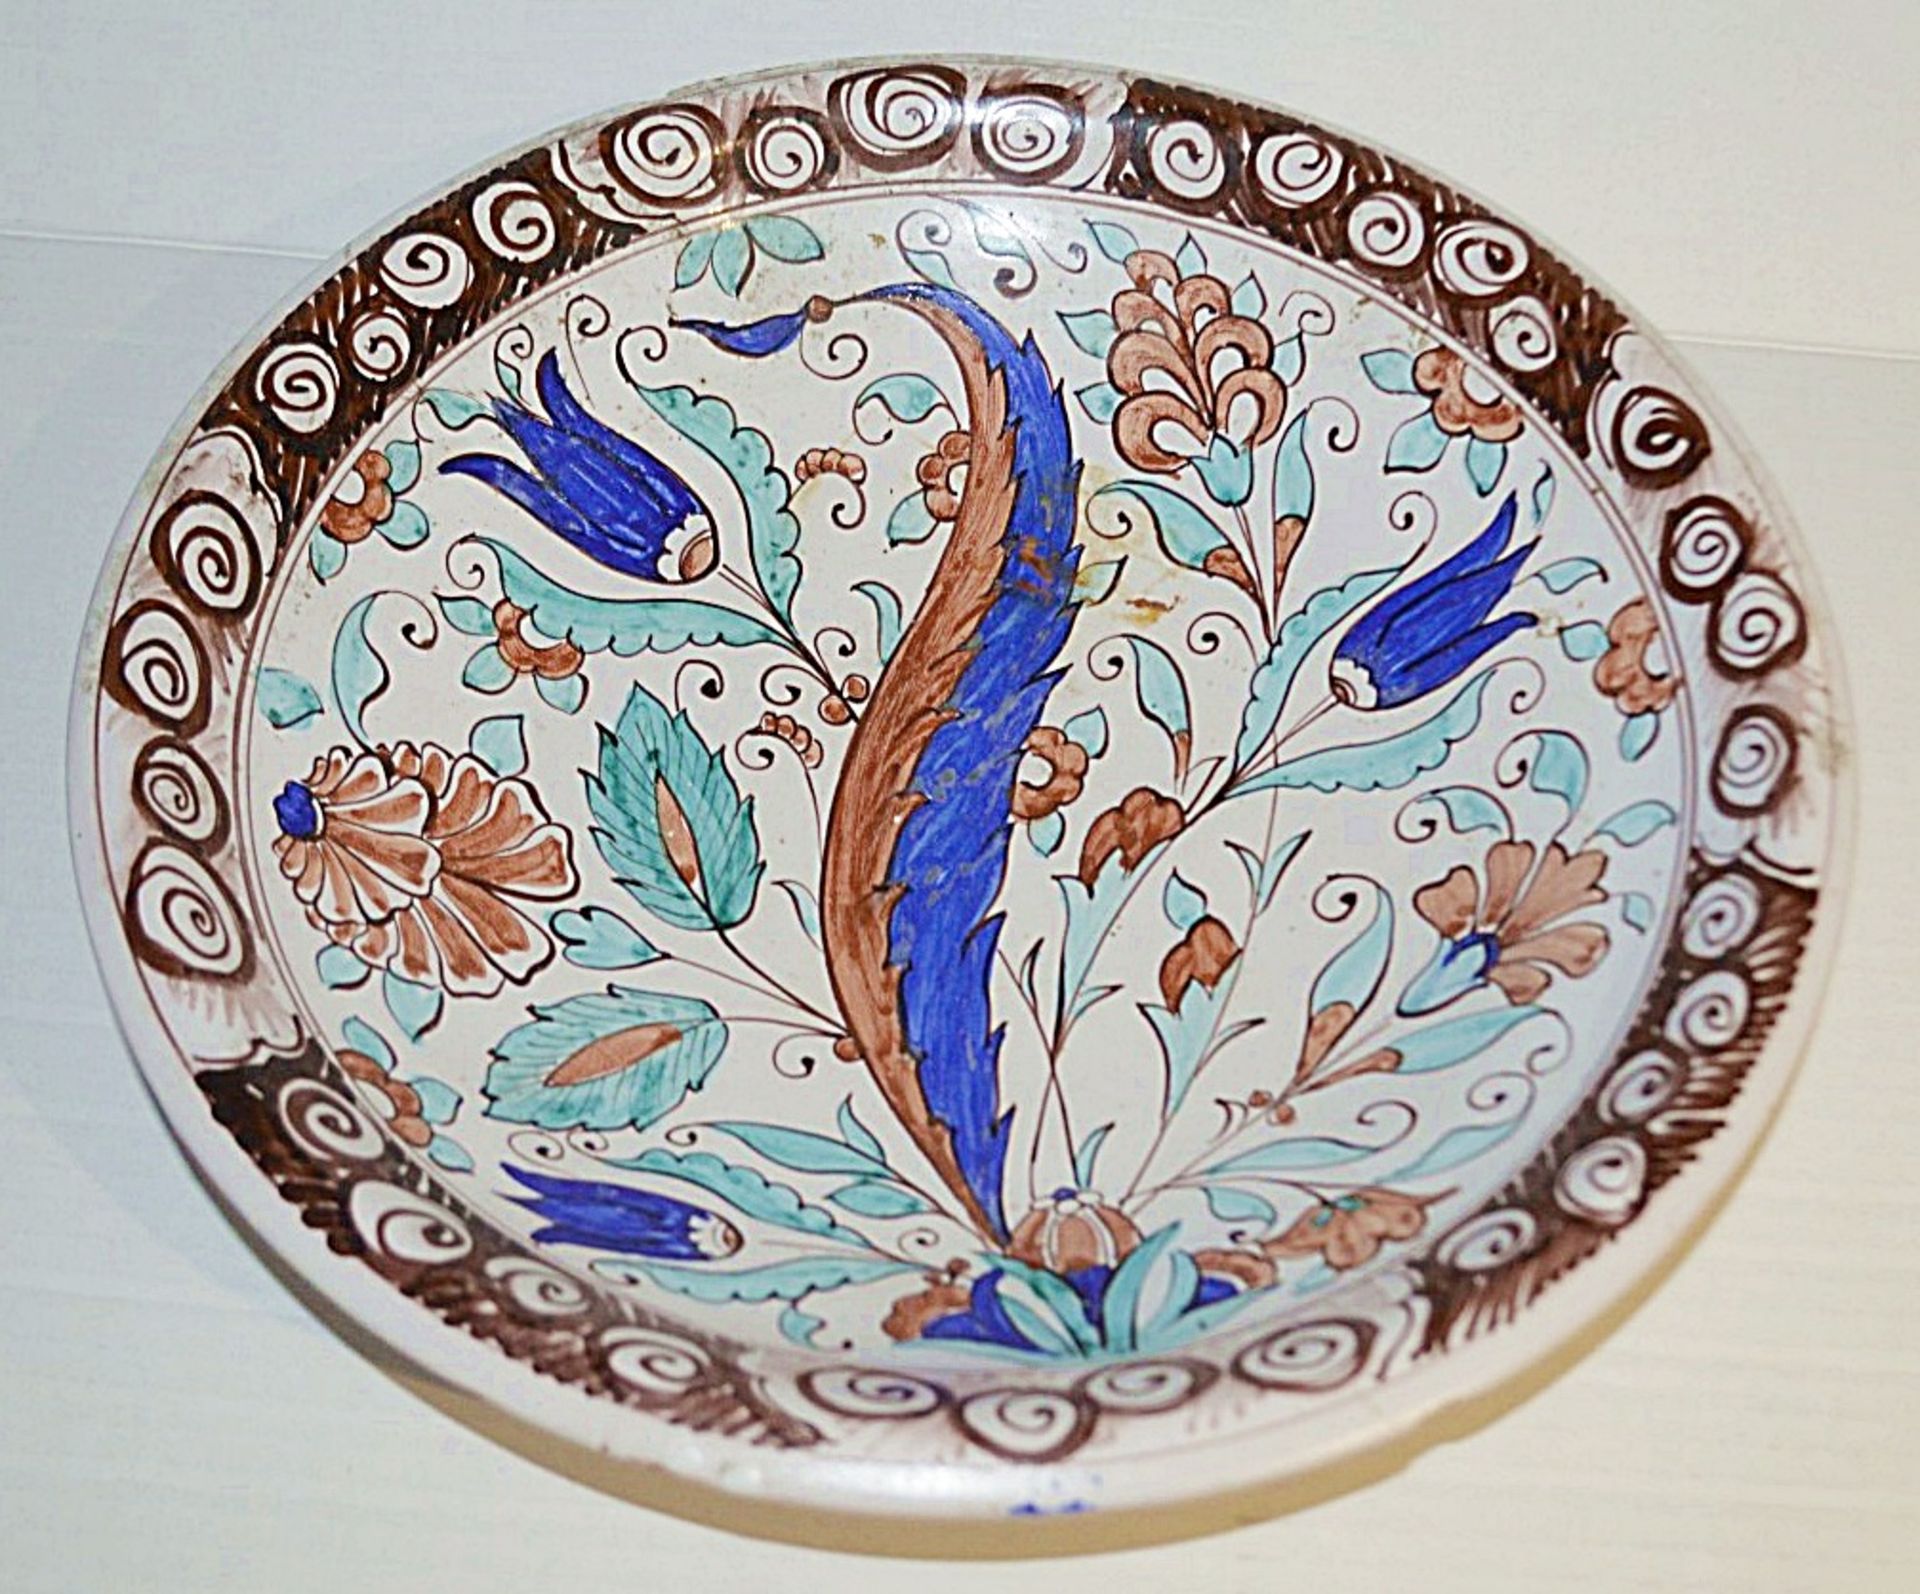 1 x Persian / Iznik Shallow Bowl With Ornate Floral Decoration - 31cm (12.25ins) In Diameter -